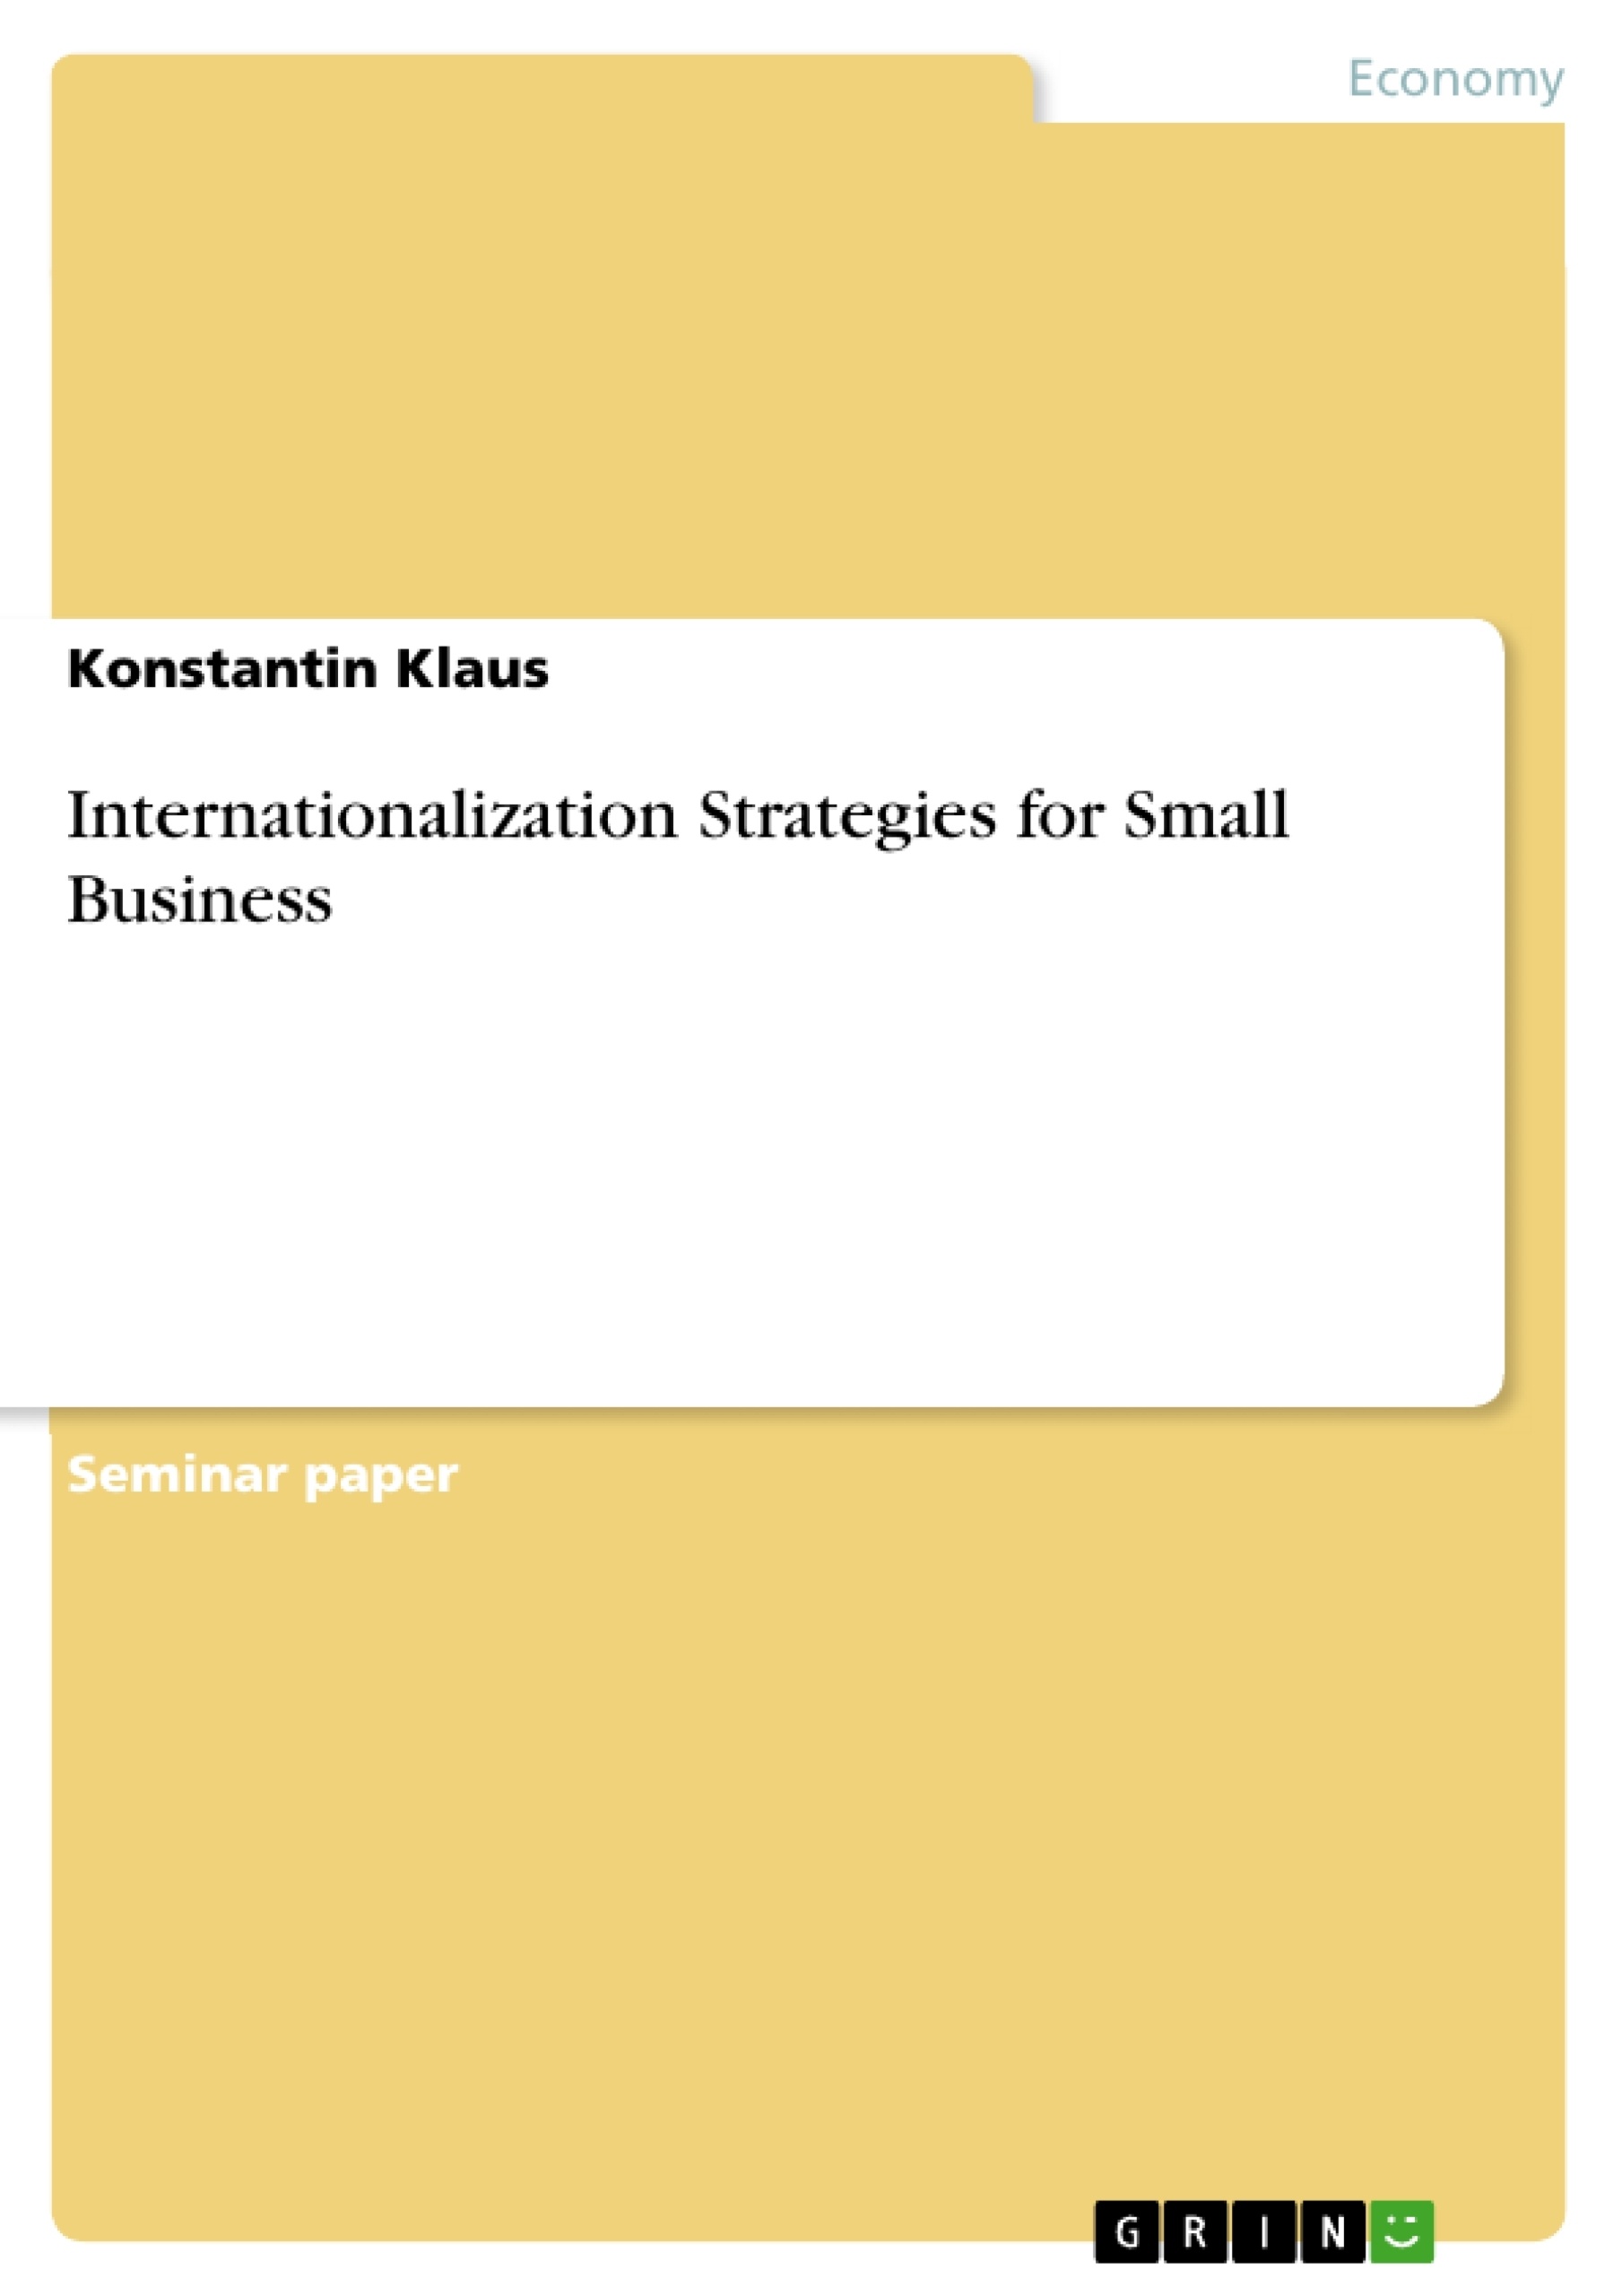 Title: Internationalization Strategies for Small Business